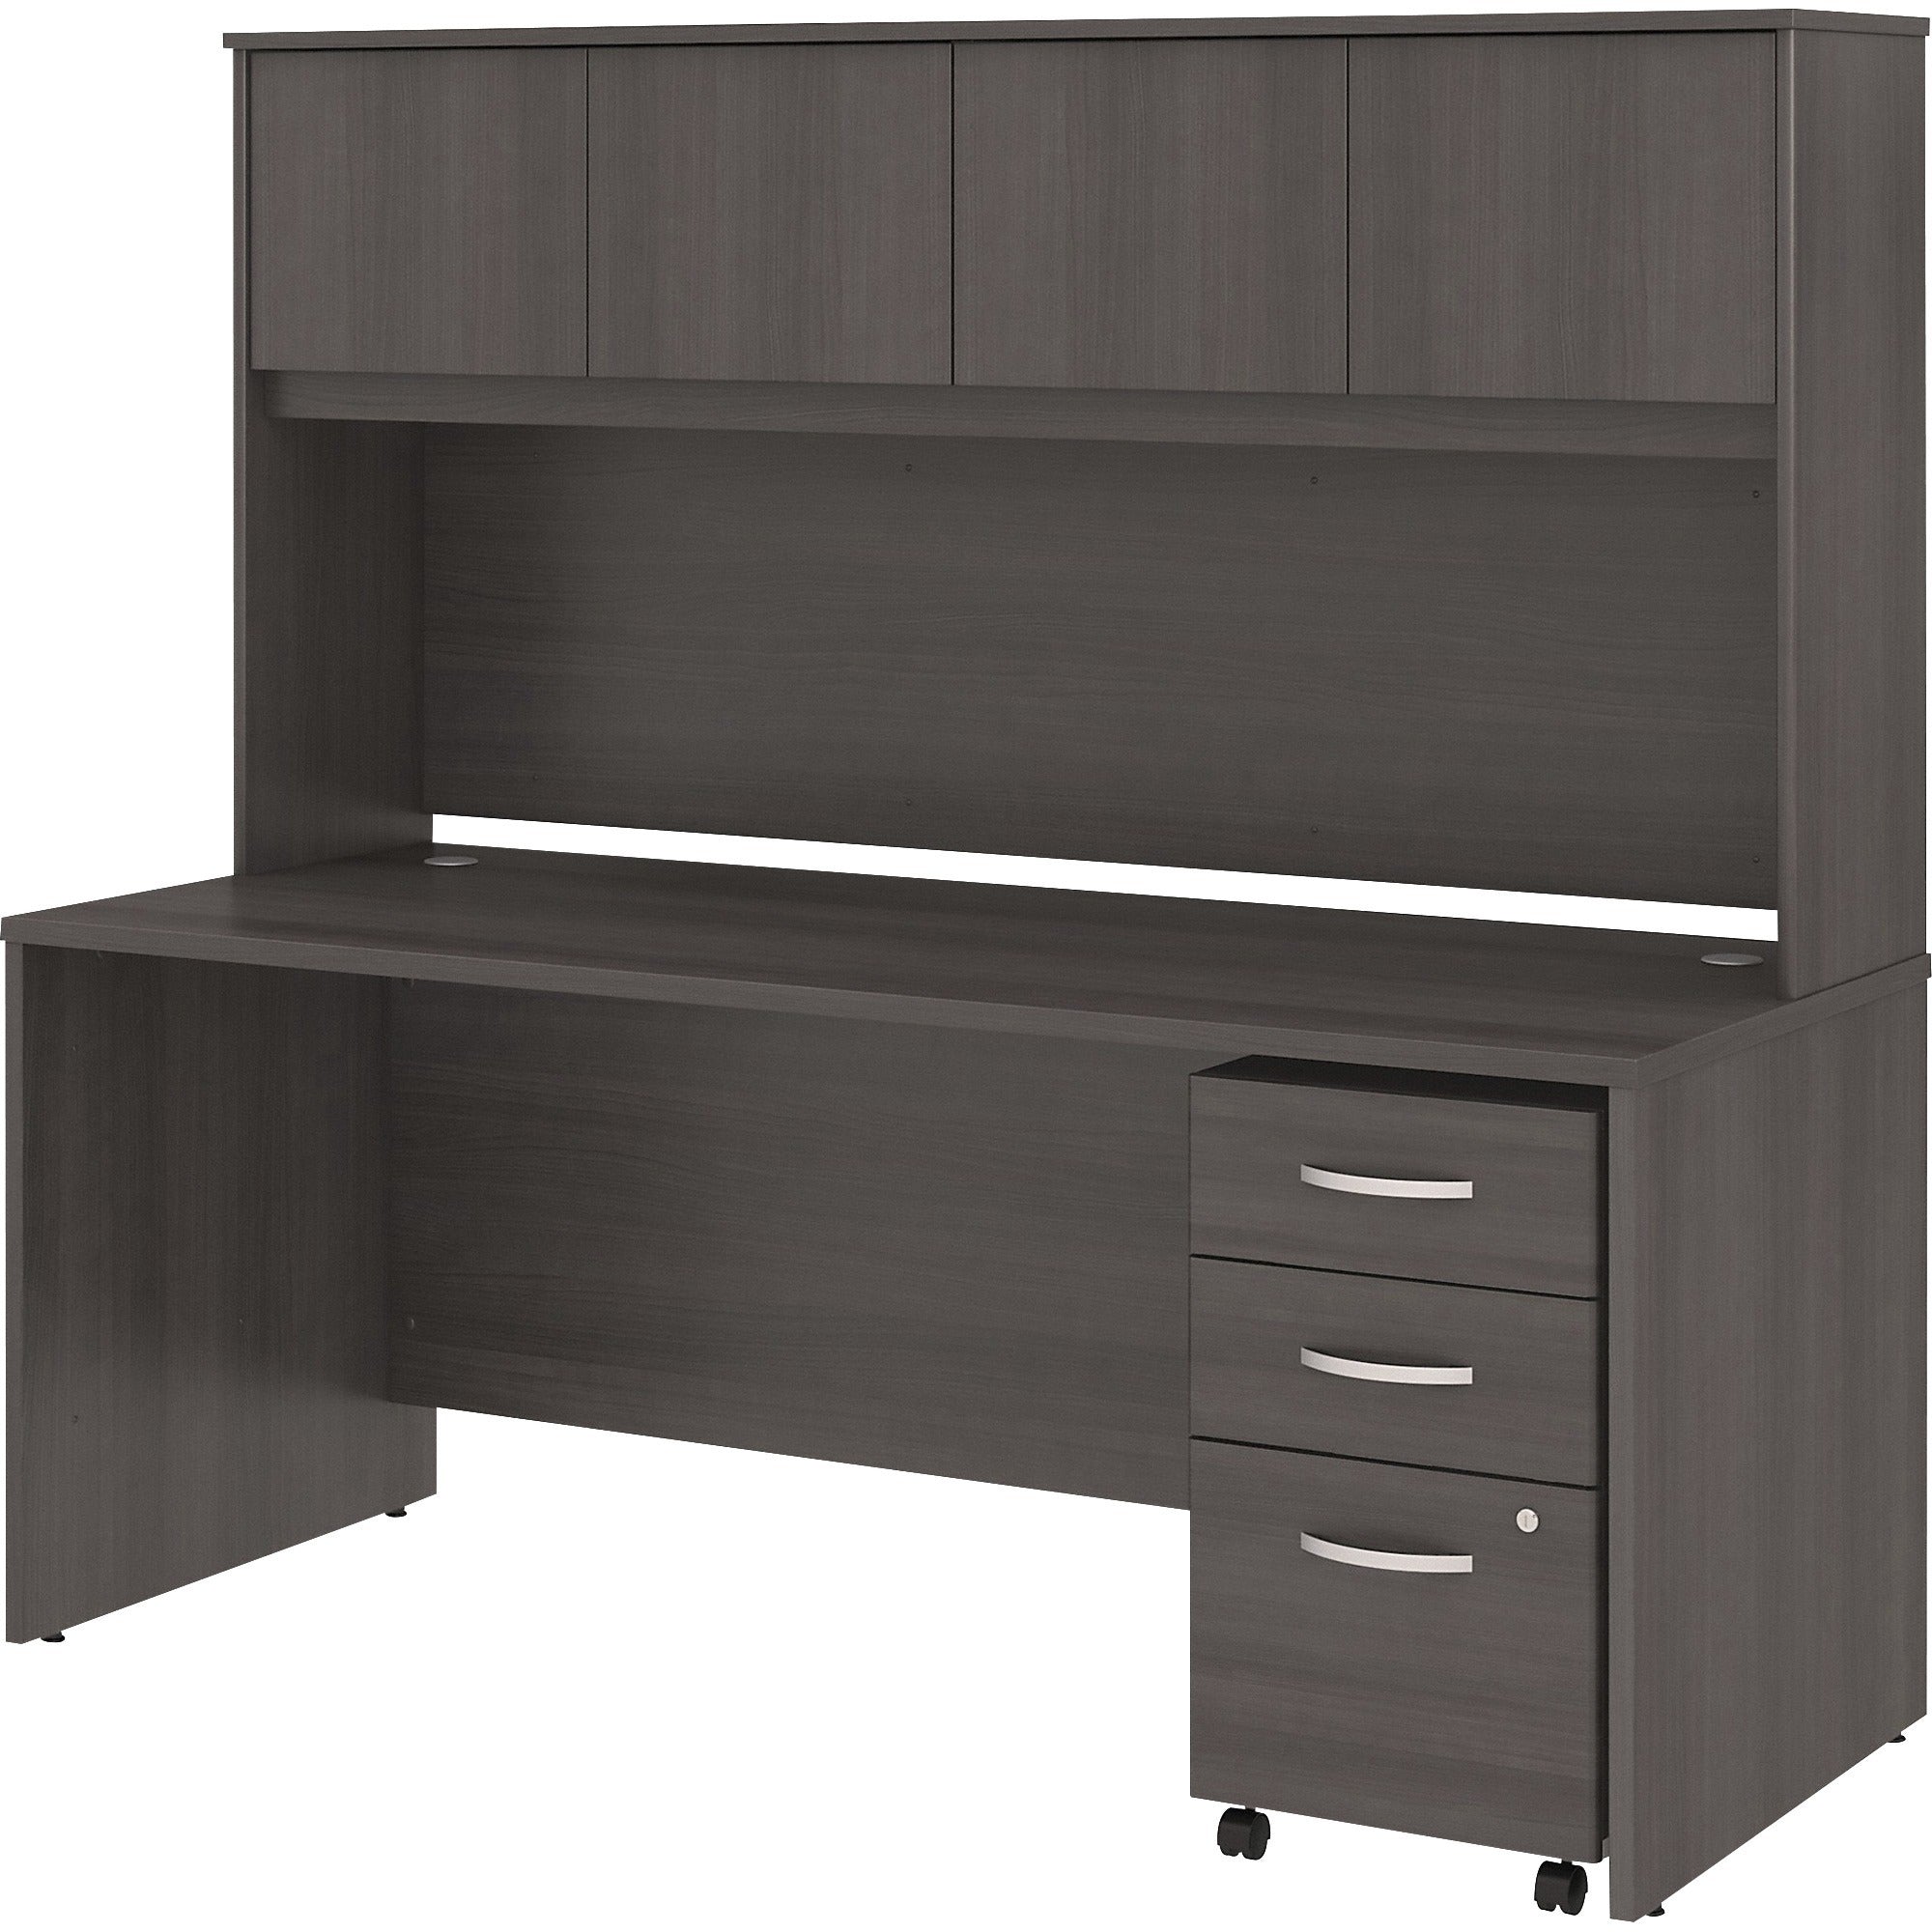 Bush Business Furniture Studio C 72W x 30D Office Desk with Hutch and Mobile File Cabinet - 72" x 30" Desk, 72" Hutch - 3 x File, Box Drawer(s) - 4 Door(s) - Band Edge - Finish: Storm Gray, Thermofused Laminate (TFL) - 1